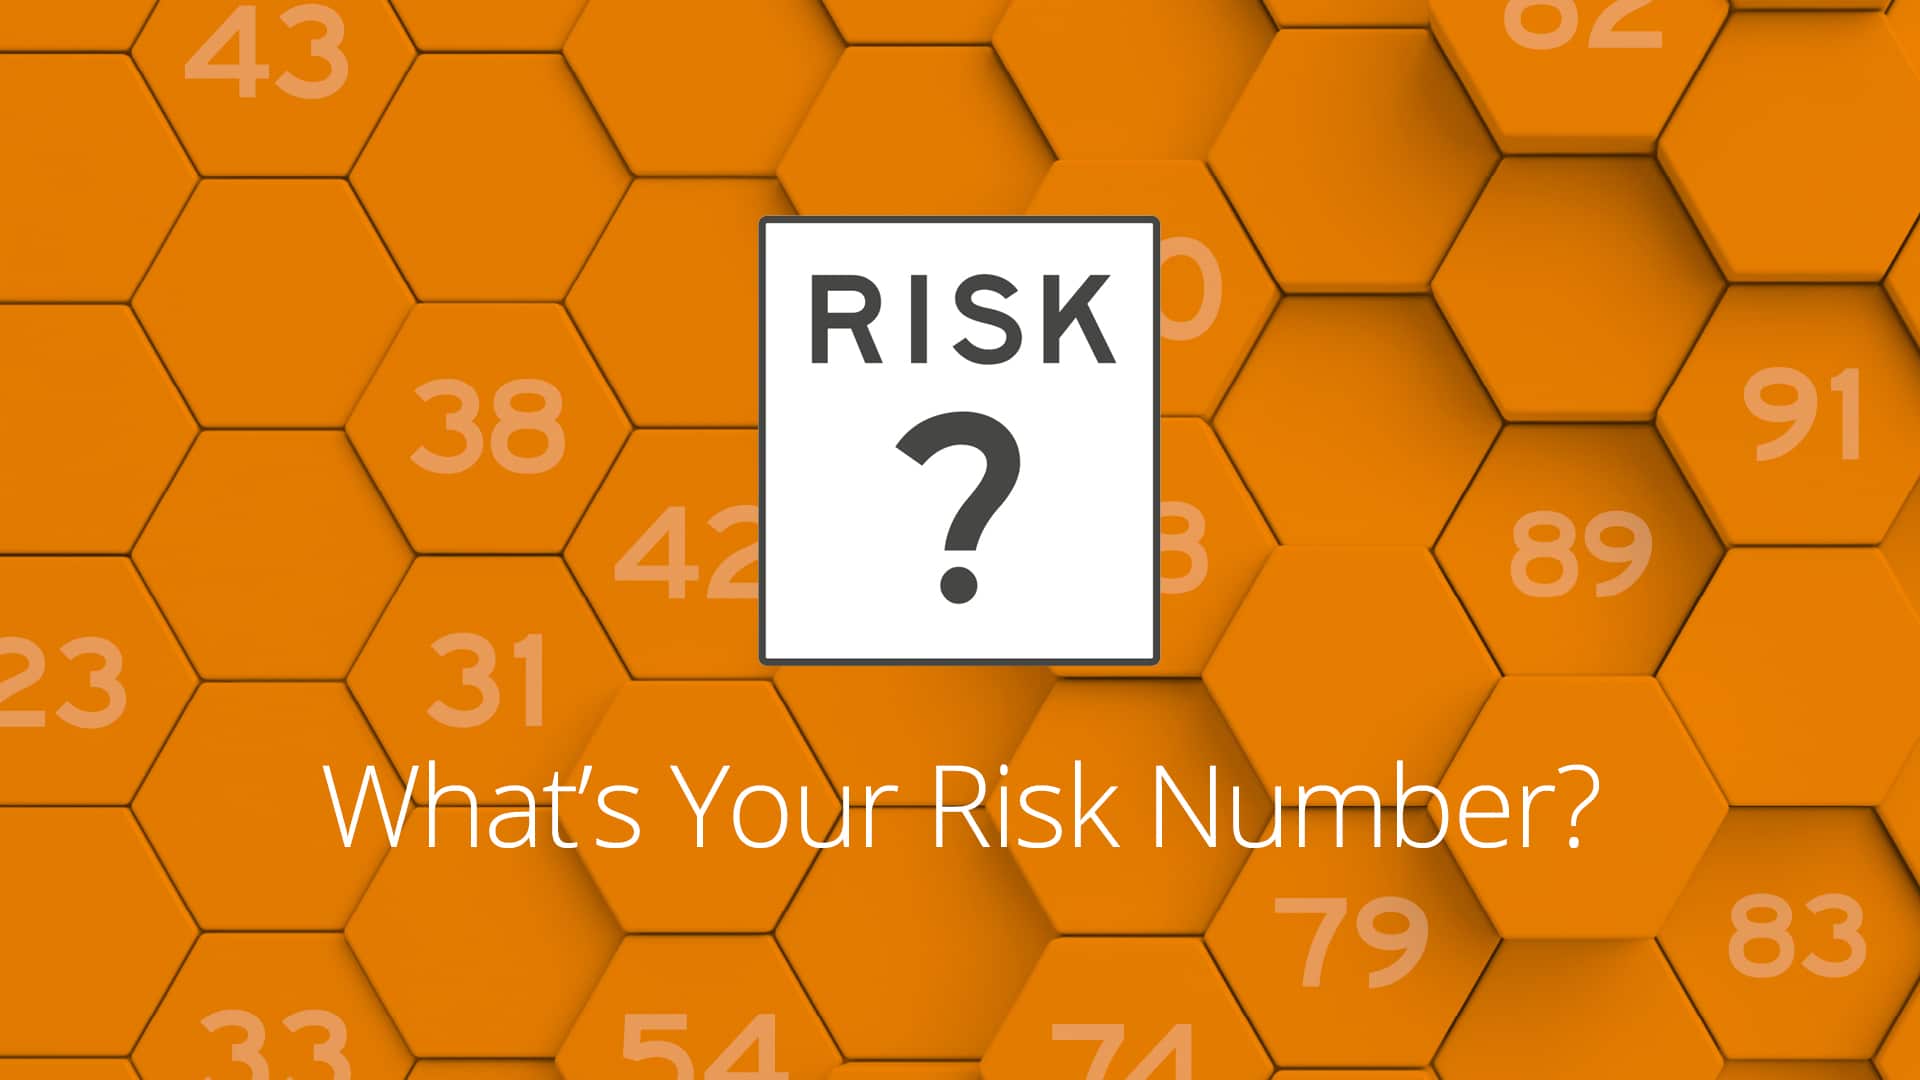 What is your risk number?